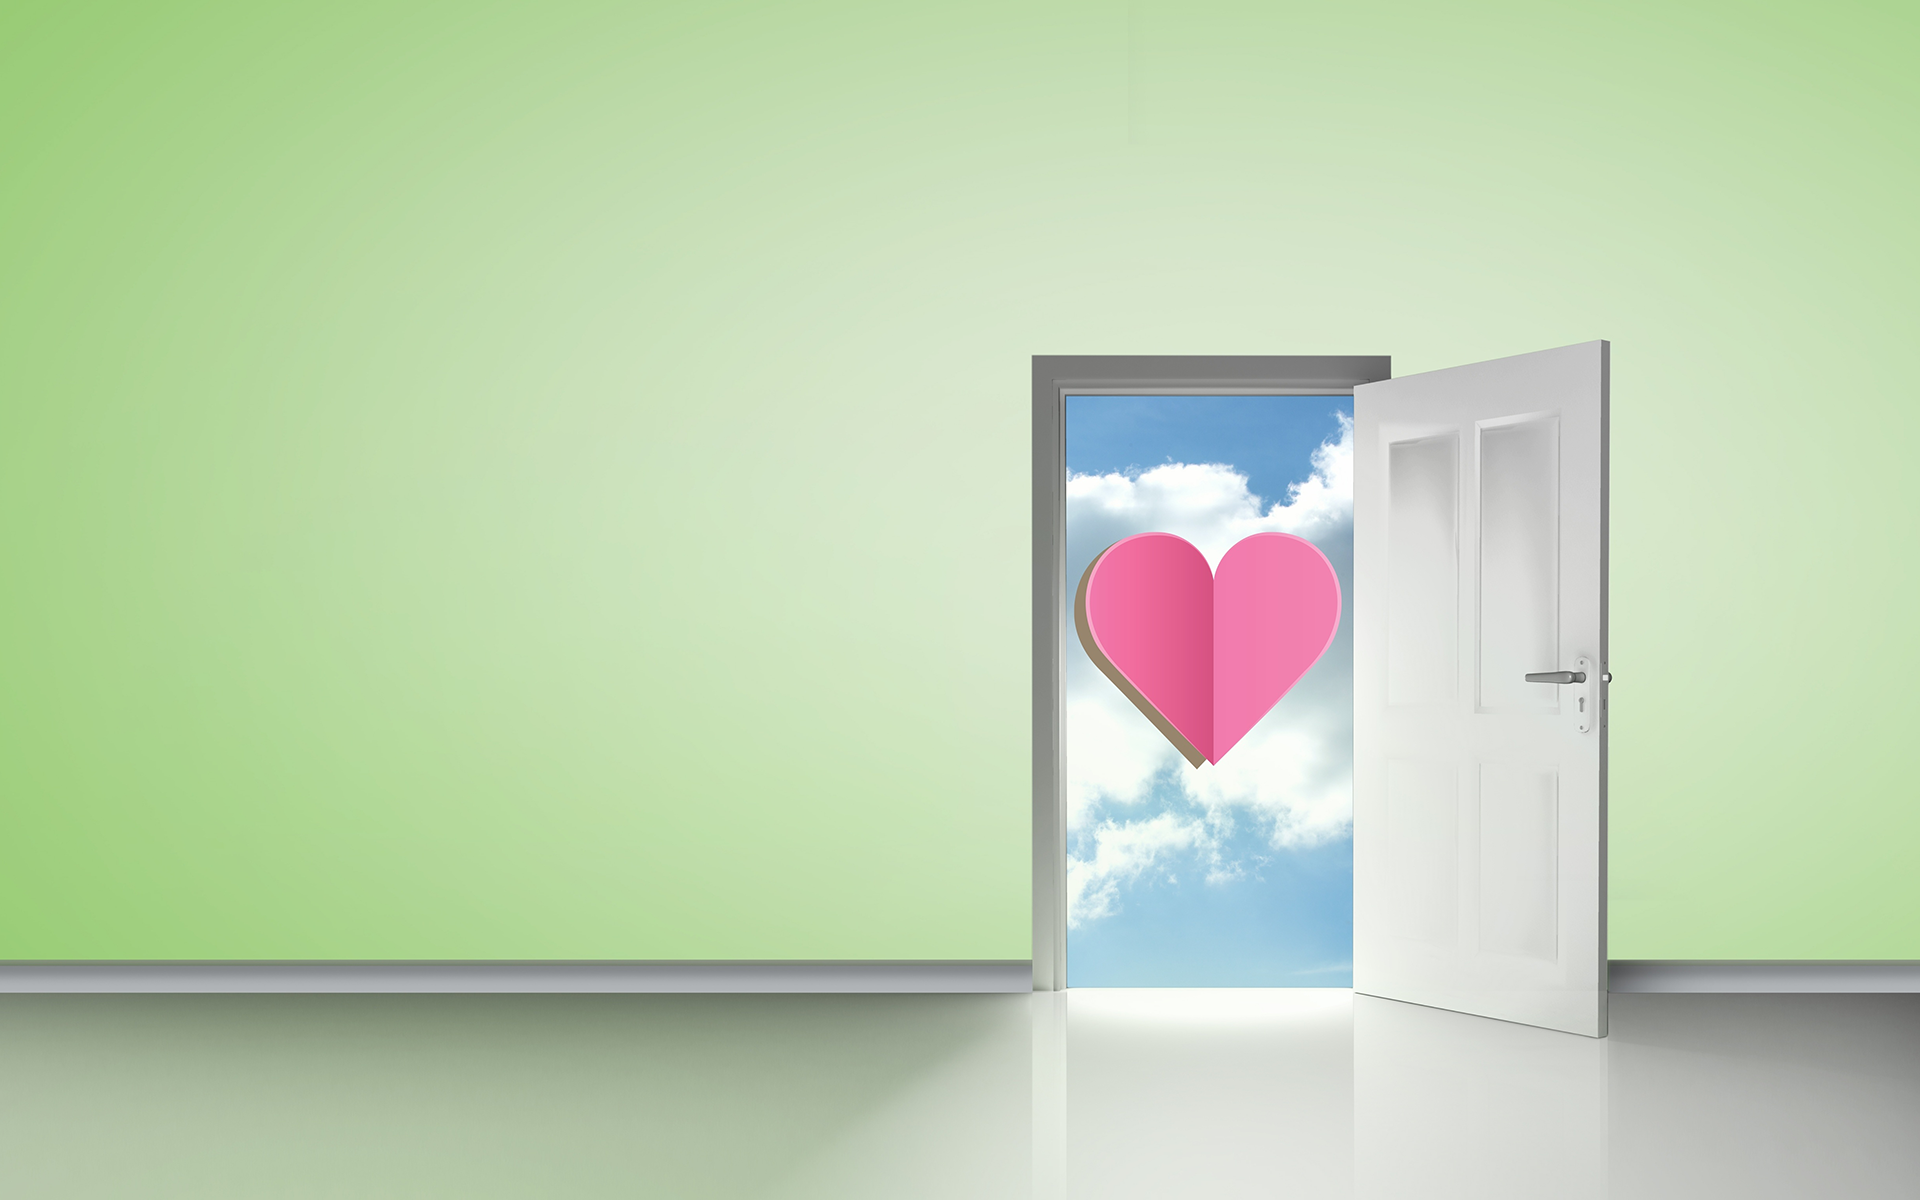 Image of a white door that stands open in the middle of a green wall. Through the open door is blue sky with a pink heart.